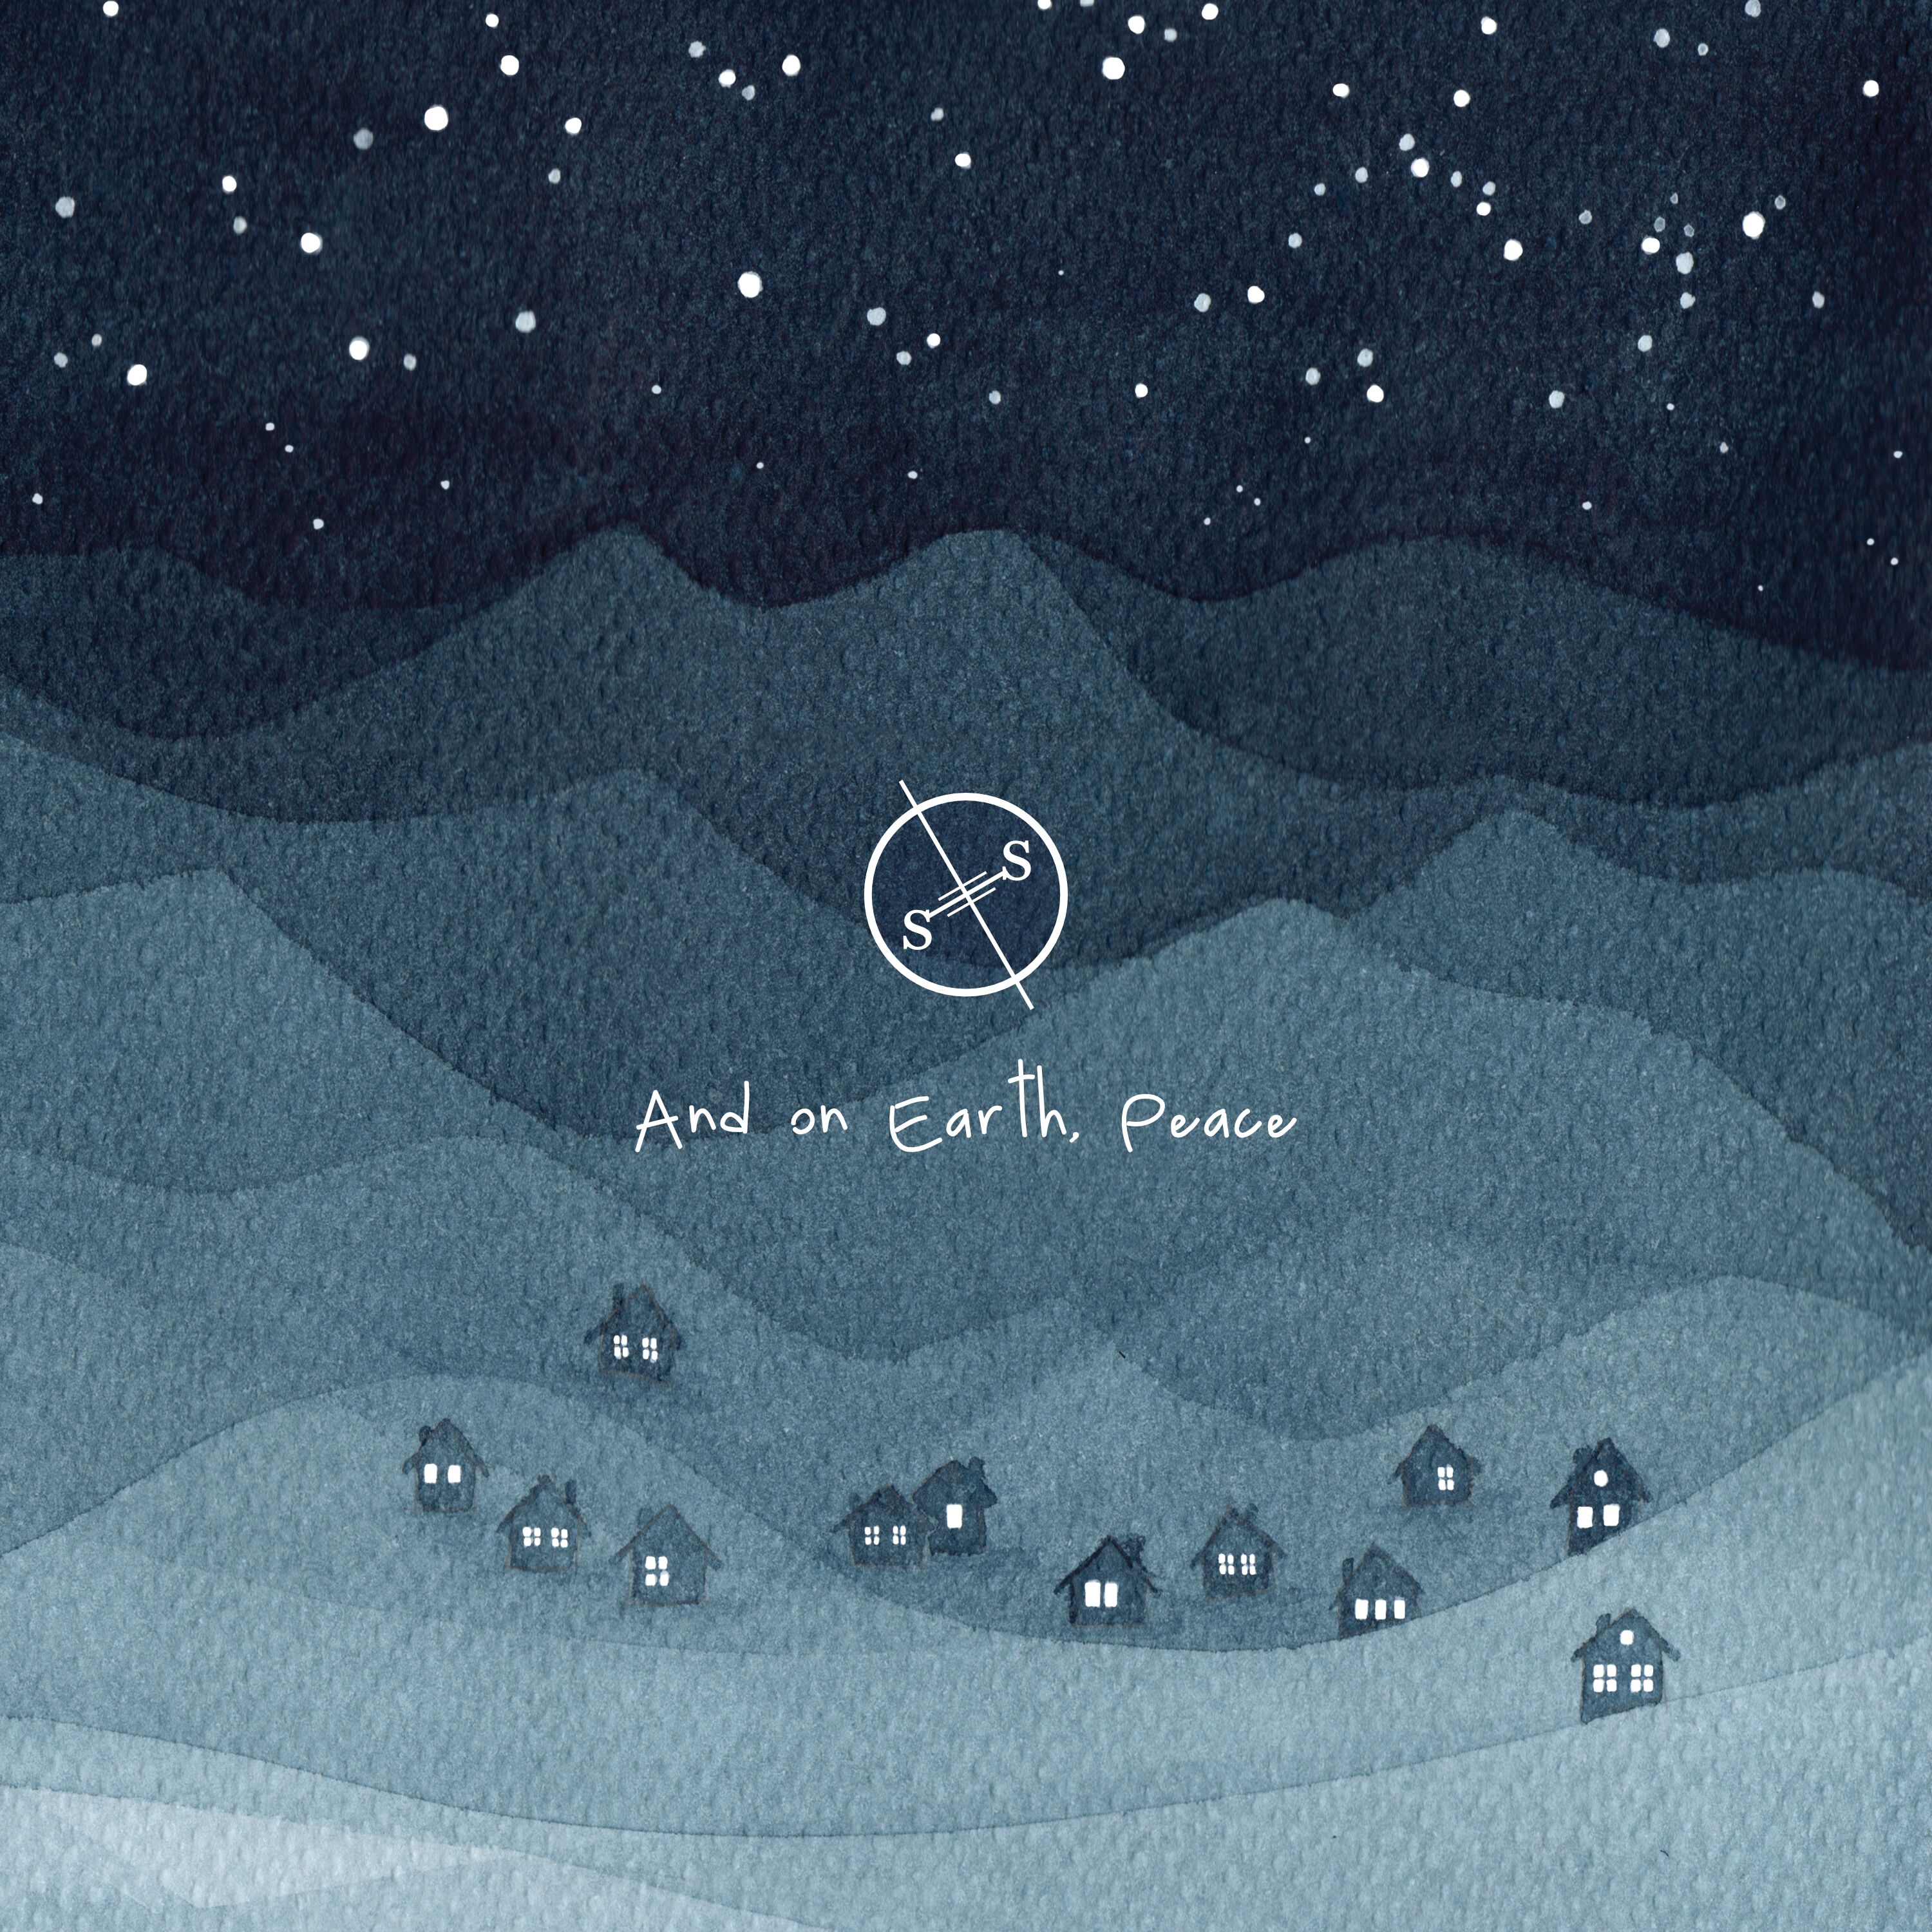 Salt Of The Sound - And on Earth, Peace